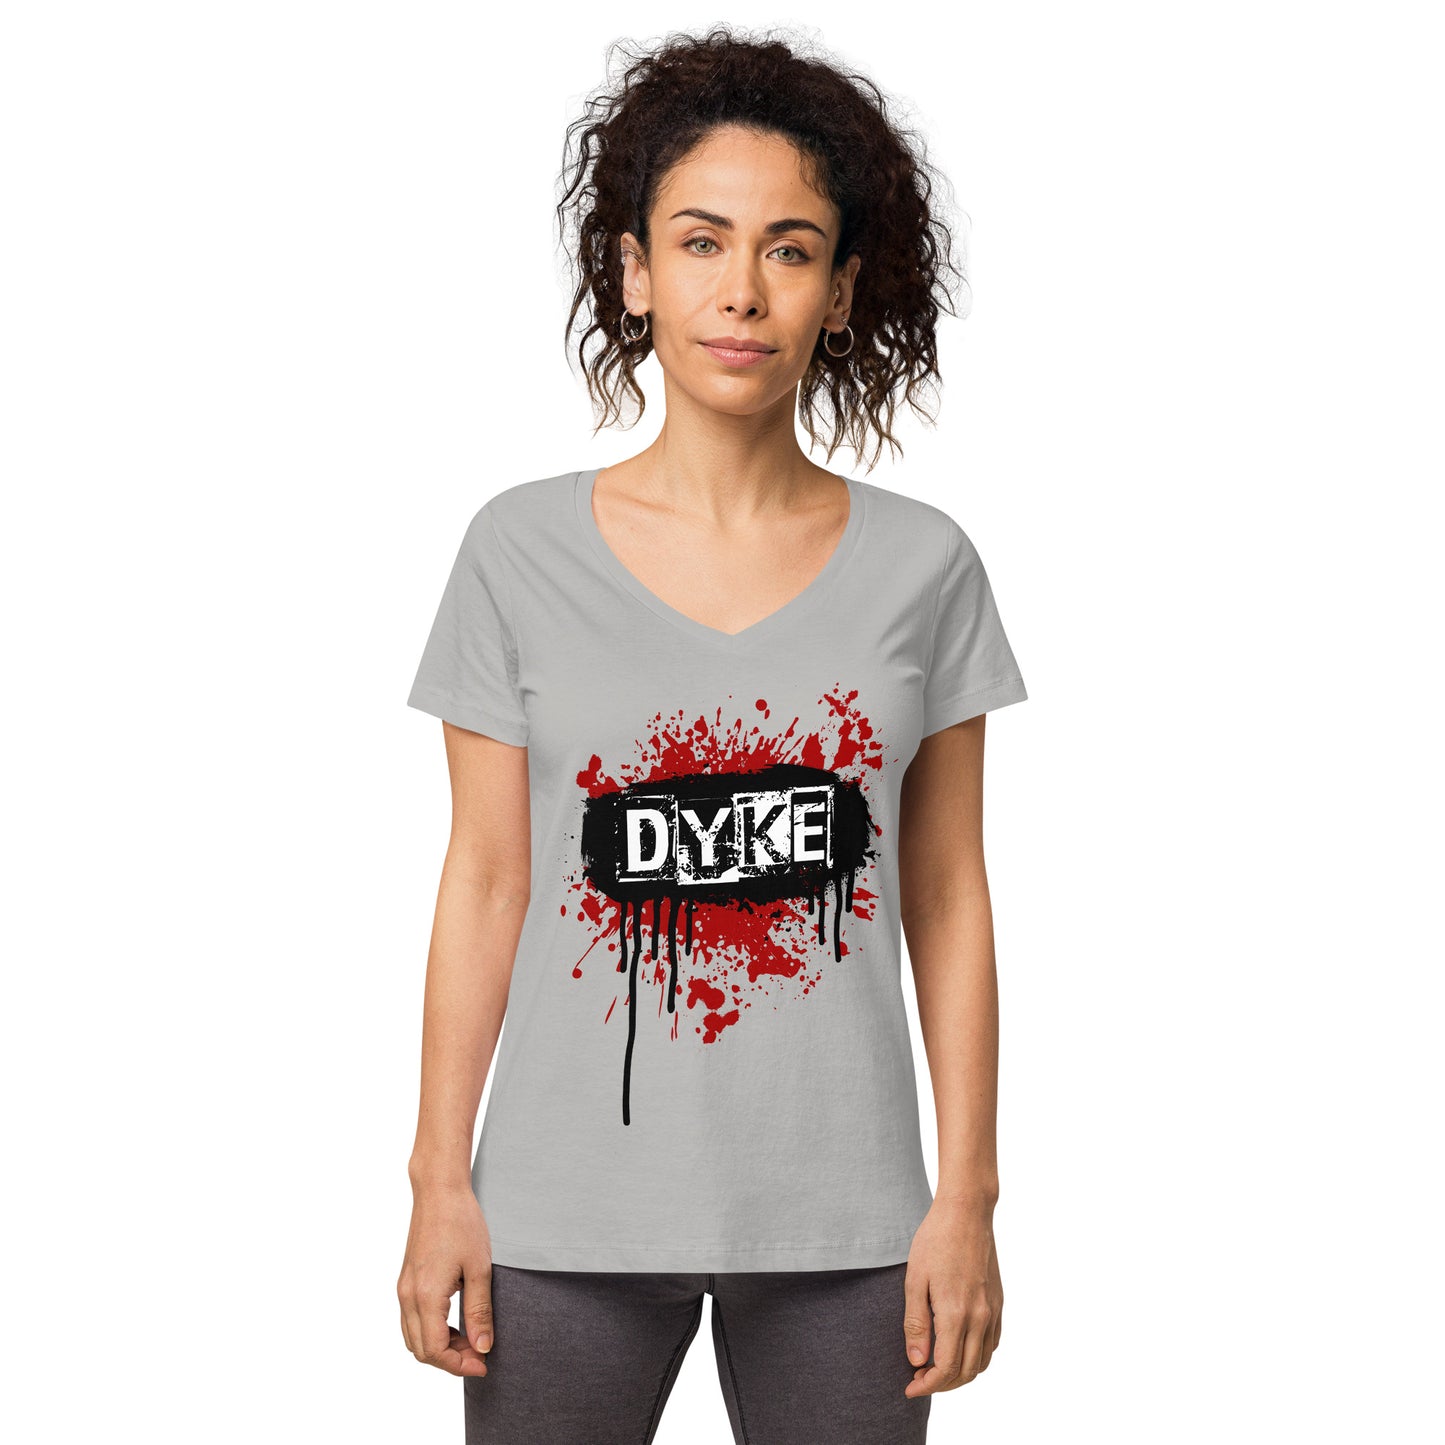 Dyke Punk - Women’s fitted v-neck t-shirt